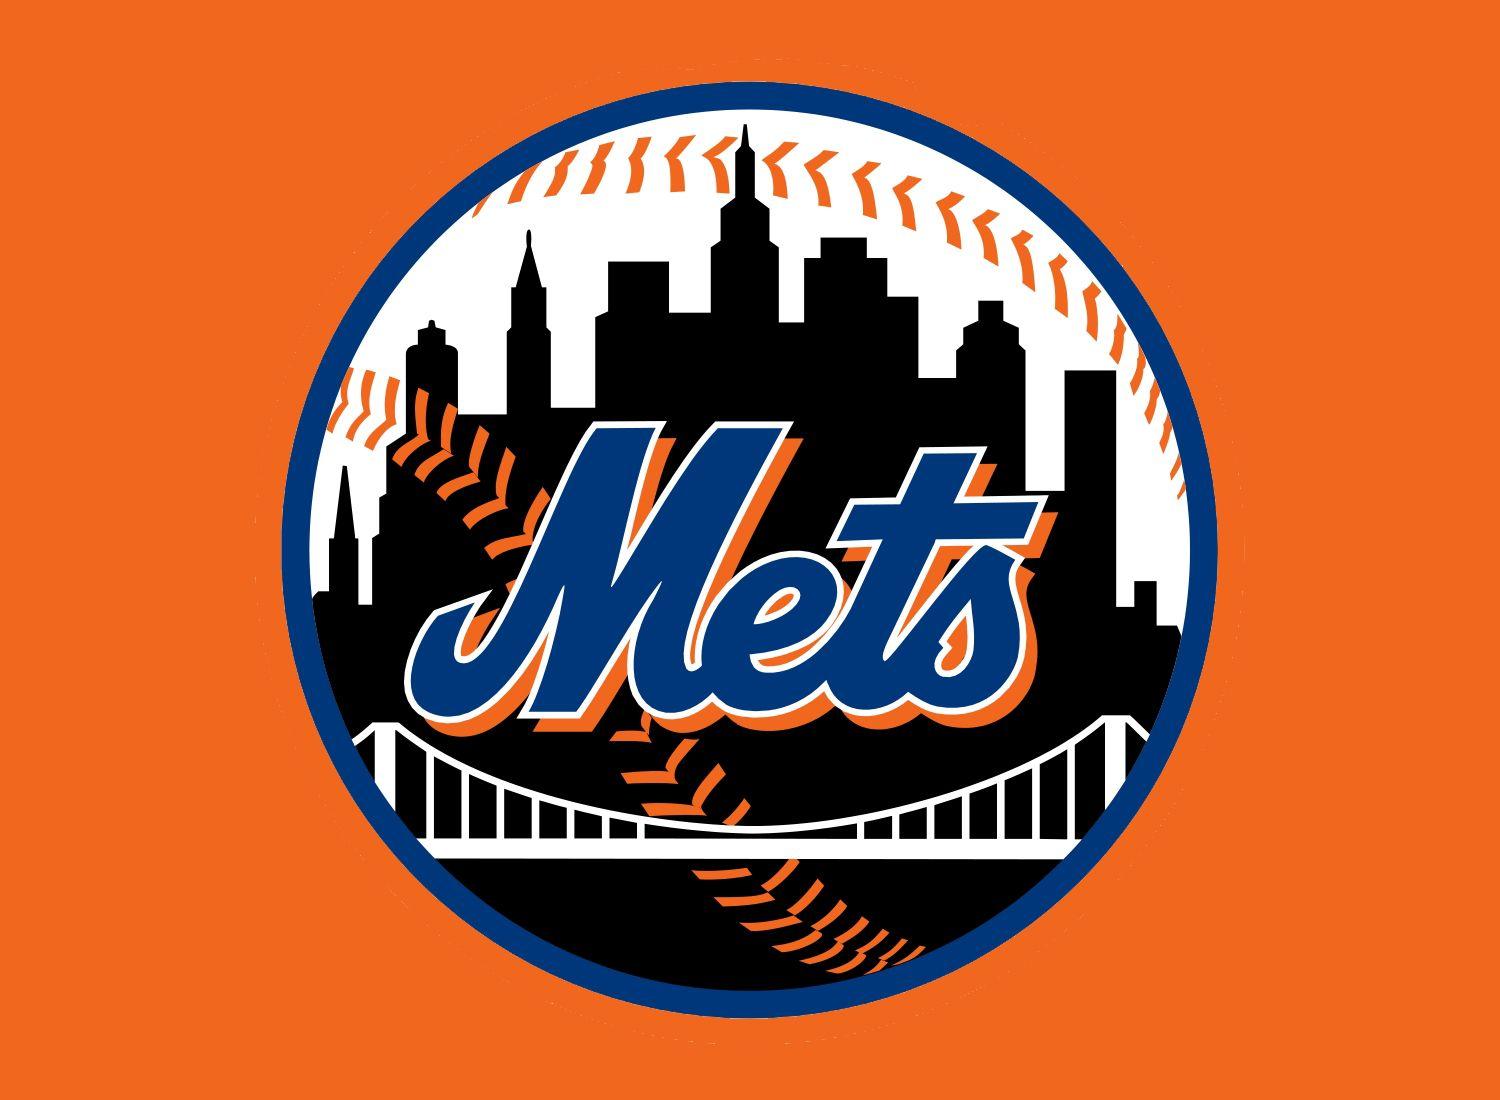 Mets Logo - New York Mets Logo, Mets Symbol, Meaning, History and Evolution